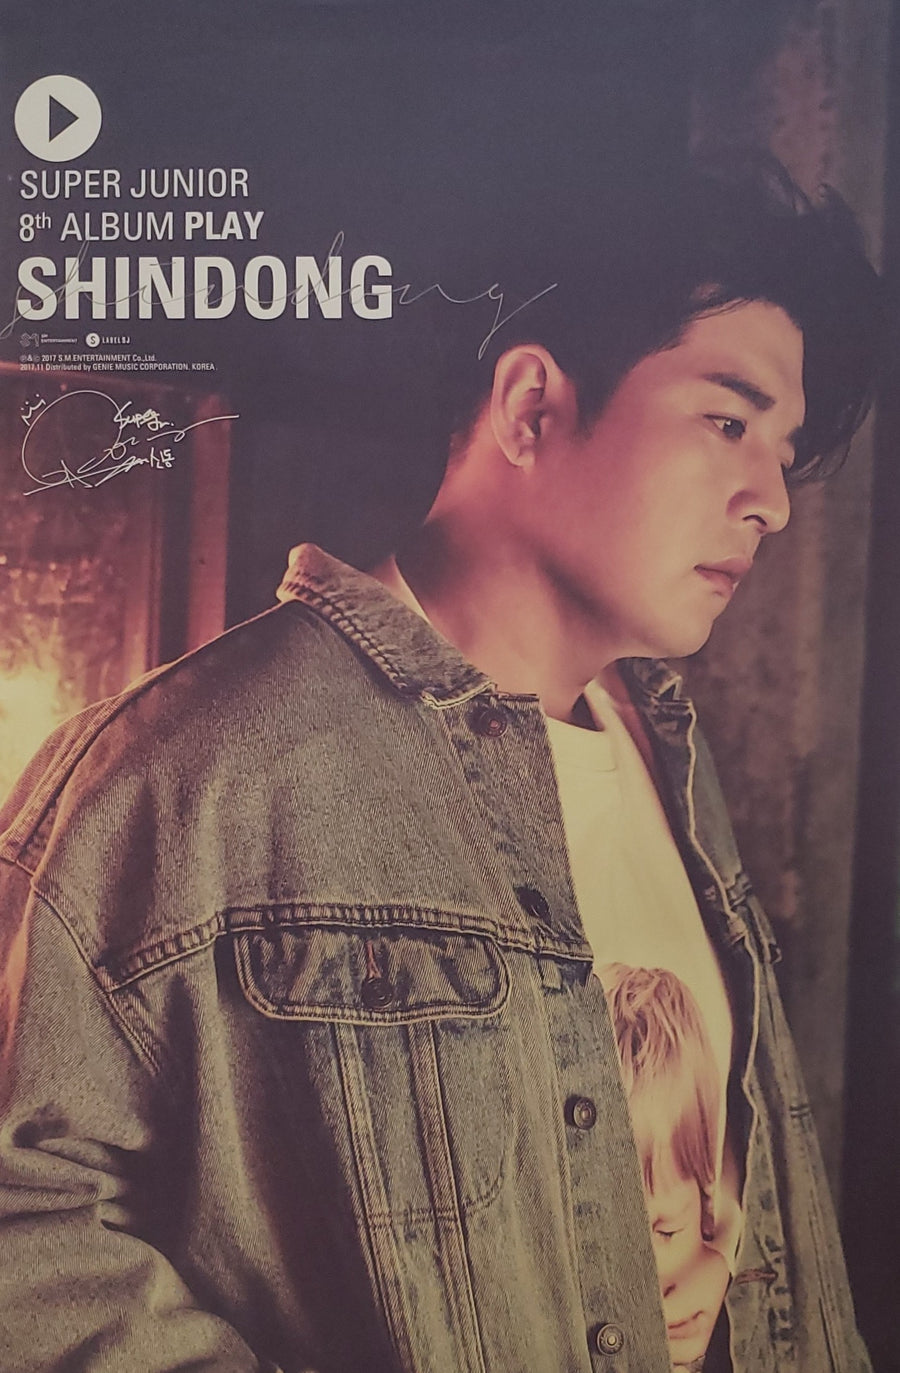 Super Junior 8th Album Play Official Poster - Photo Concept Shindong